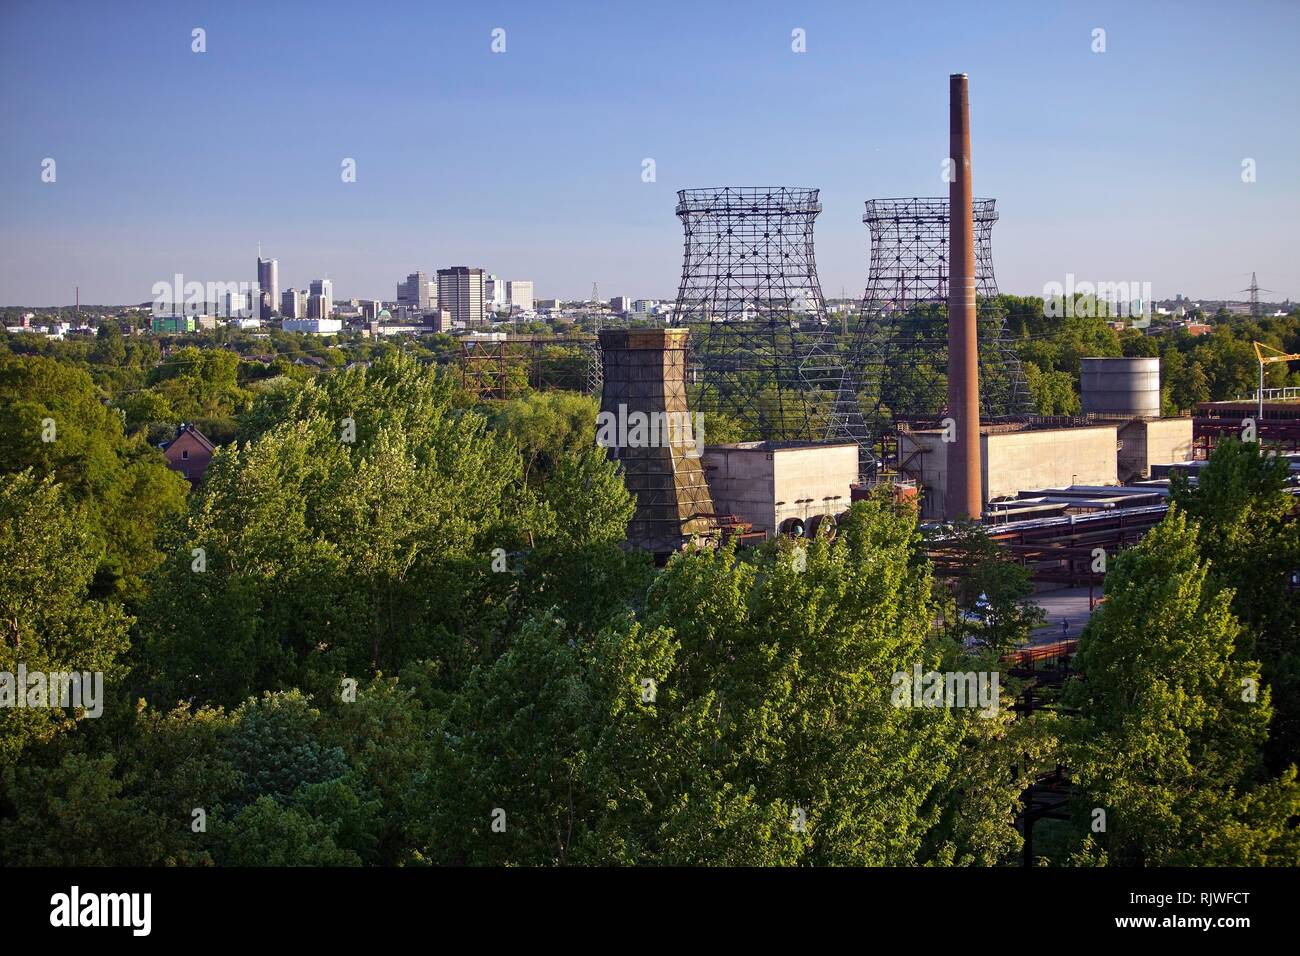 Cooling towers of the Zollverein coking plant and the skyline of the city centre, Essen, Ruhr area, North Rhine-Westphalia Stock Photo